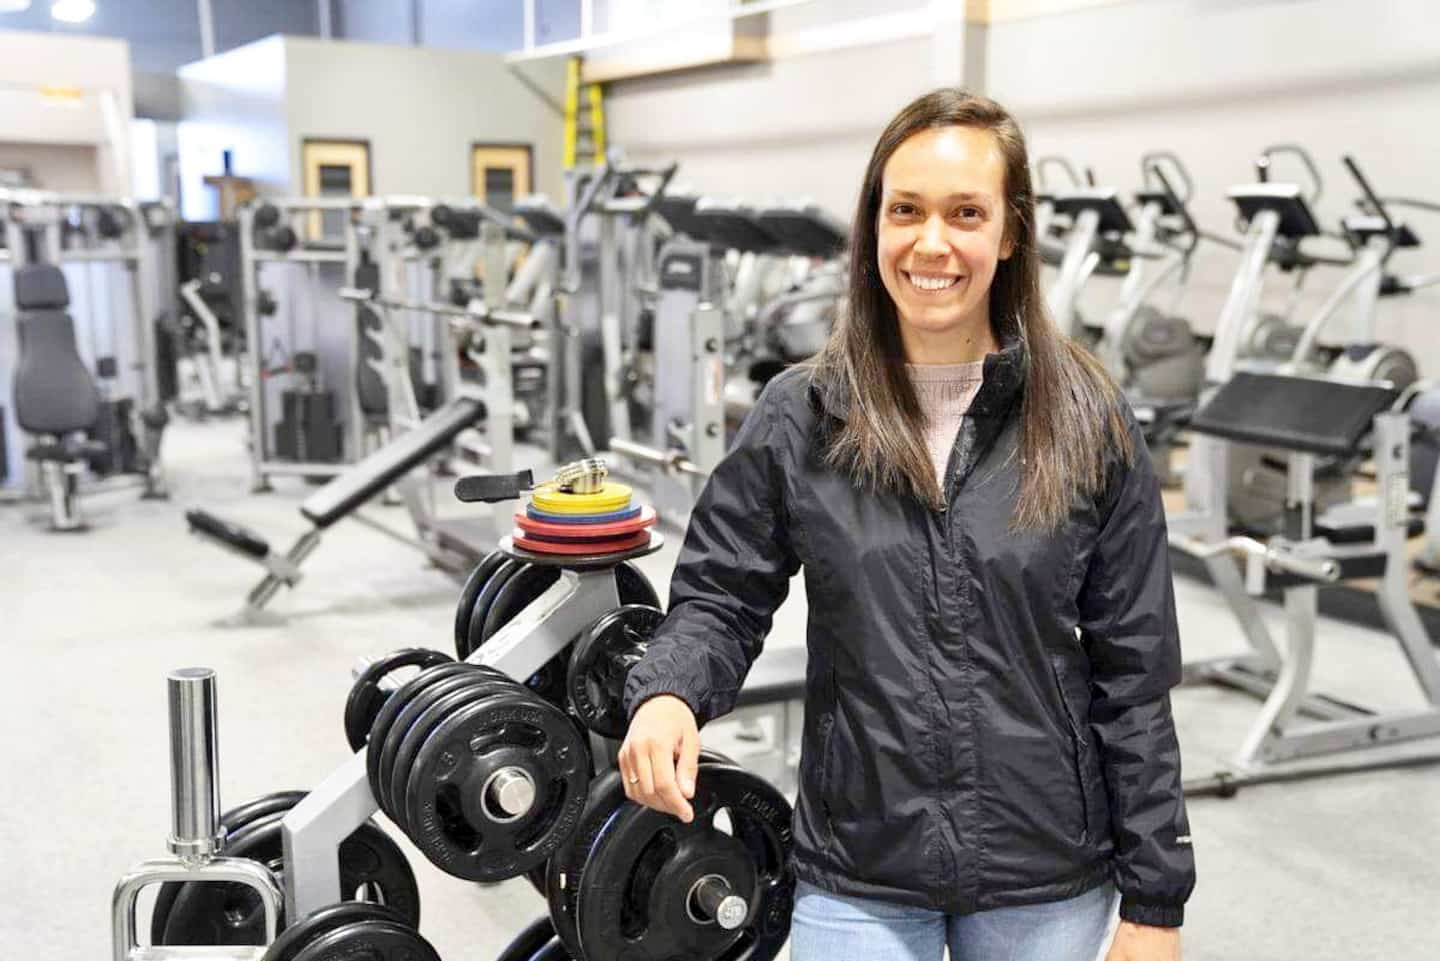 Quebec gyms are overflowing with customers